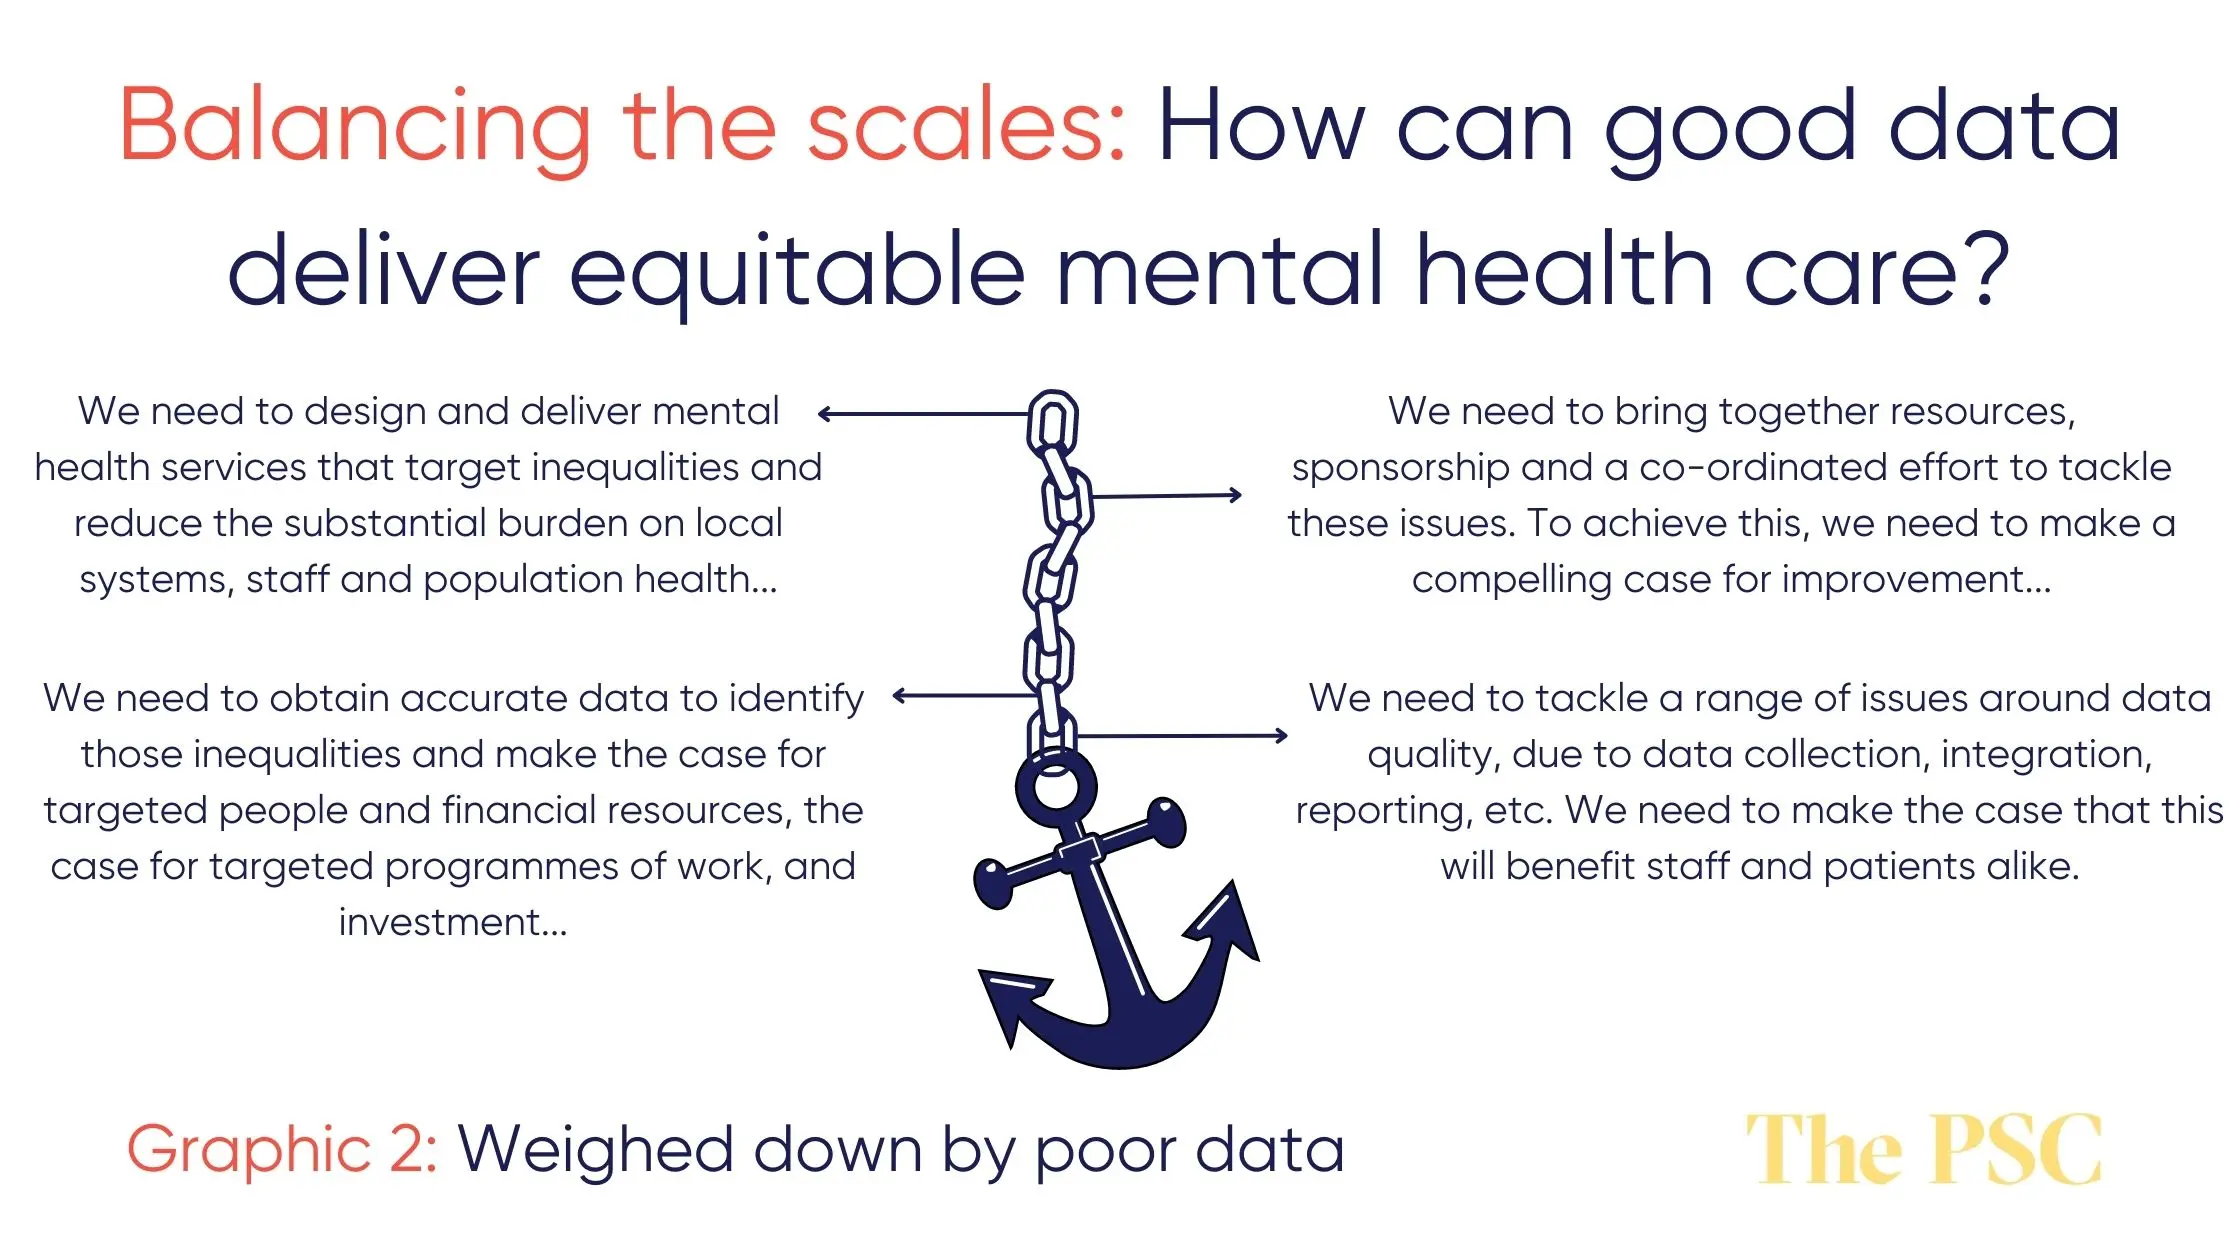 Graphic 2: Balancing the scales - How can good data deliver equitable mental health care? The graphic shows an anchor and chain and highlights 4 key points about the imporance of accurate data. These are bullet pointed in the article below.